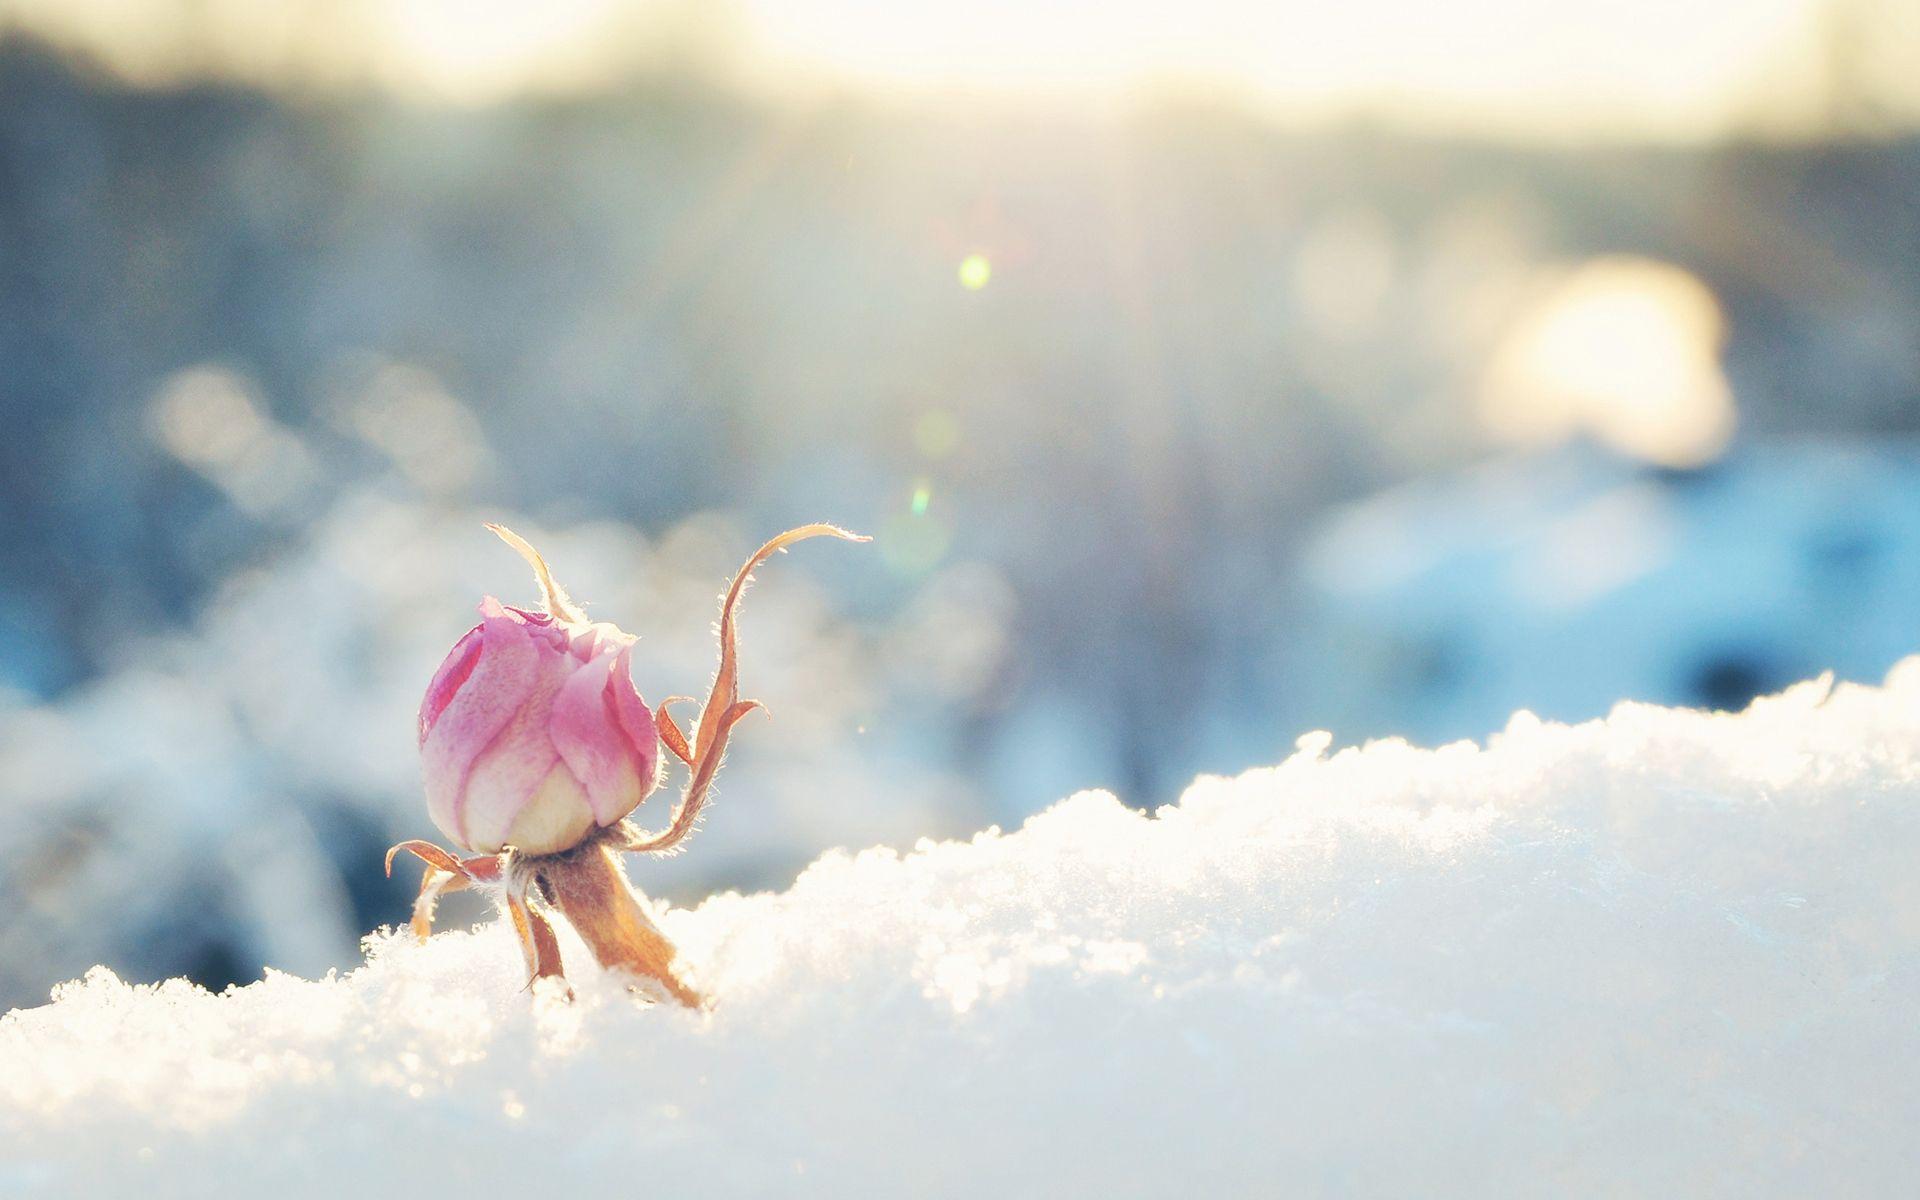 Flowers in Snow Wallpaper Free Flowers in Snow Background